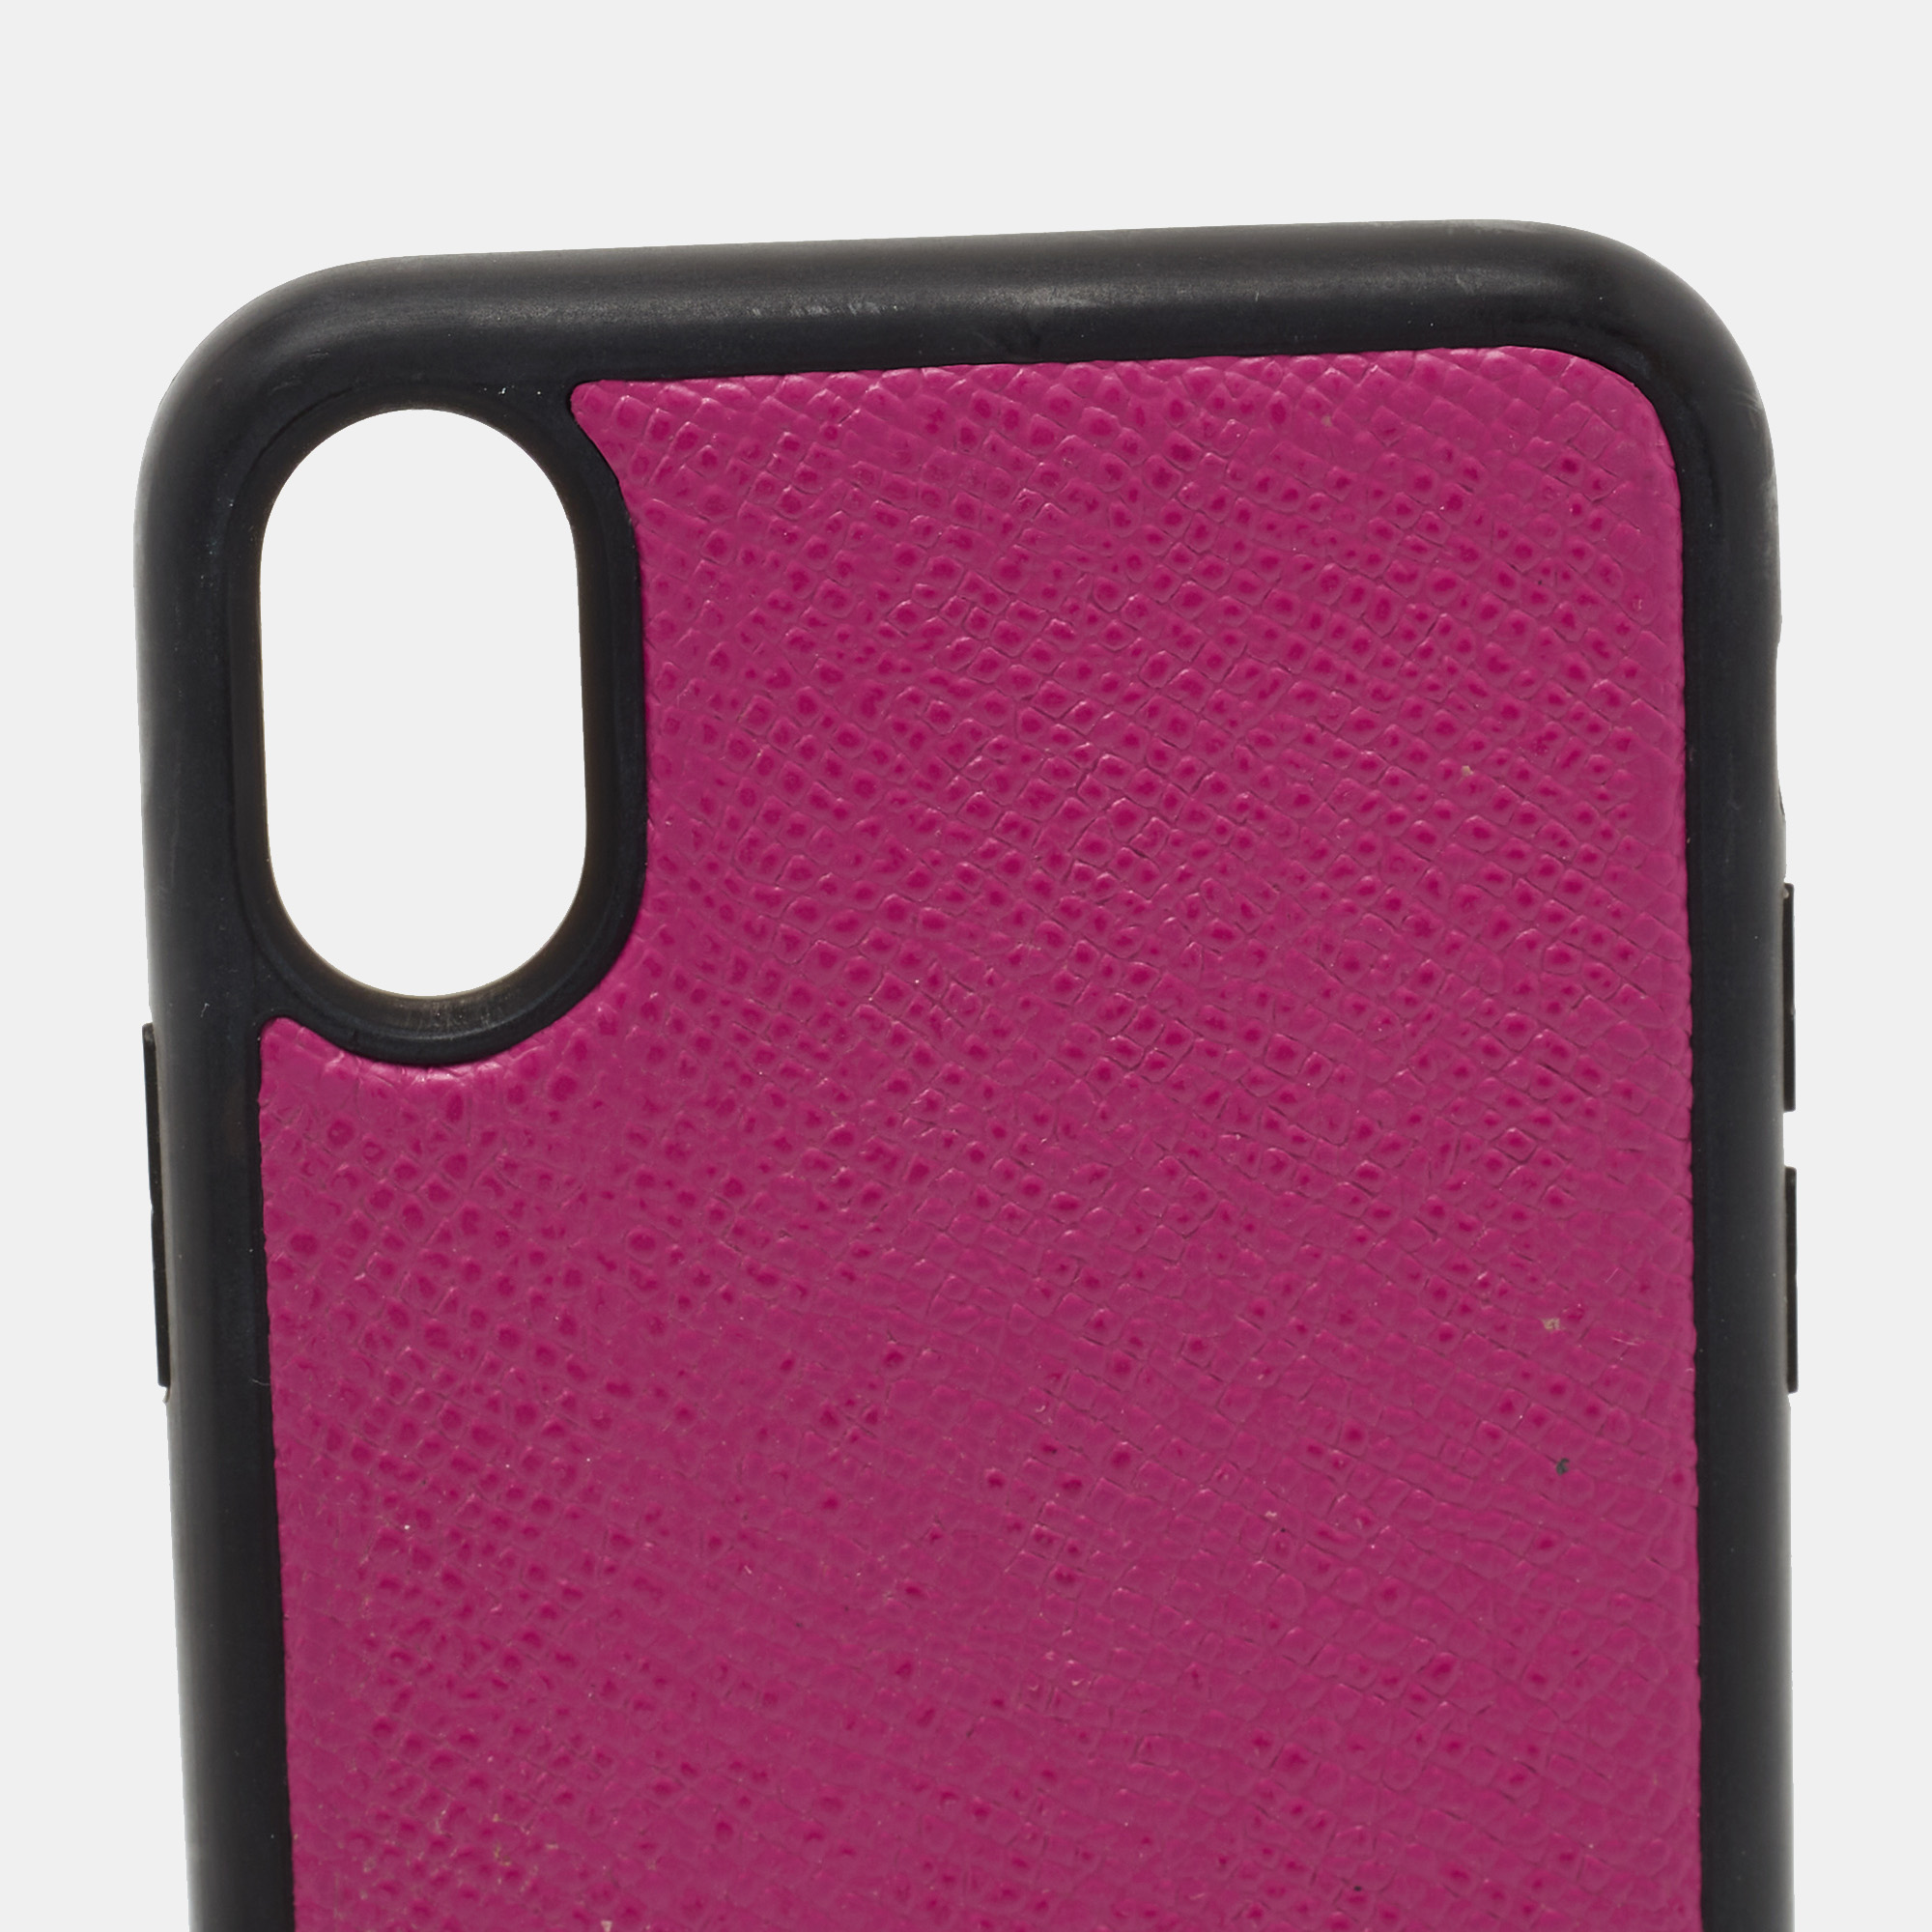 Dolce & Gabbana Pink/Black Leather IPhone X Cover